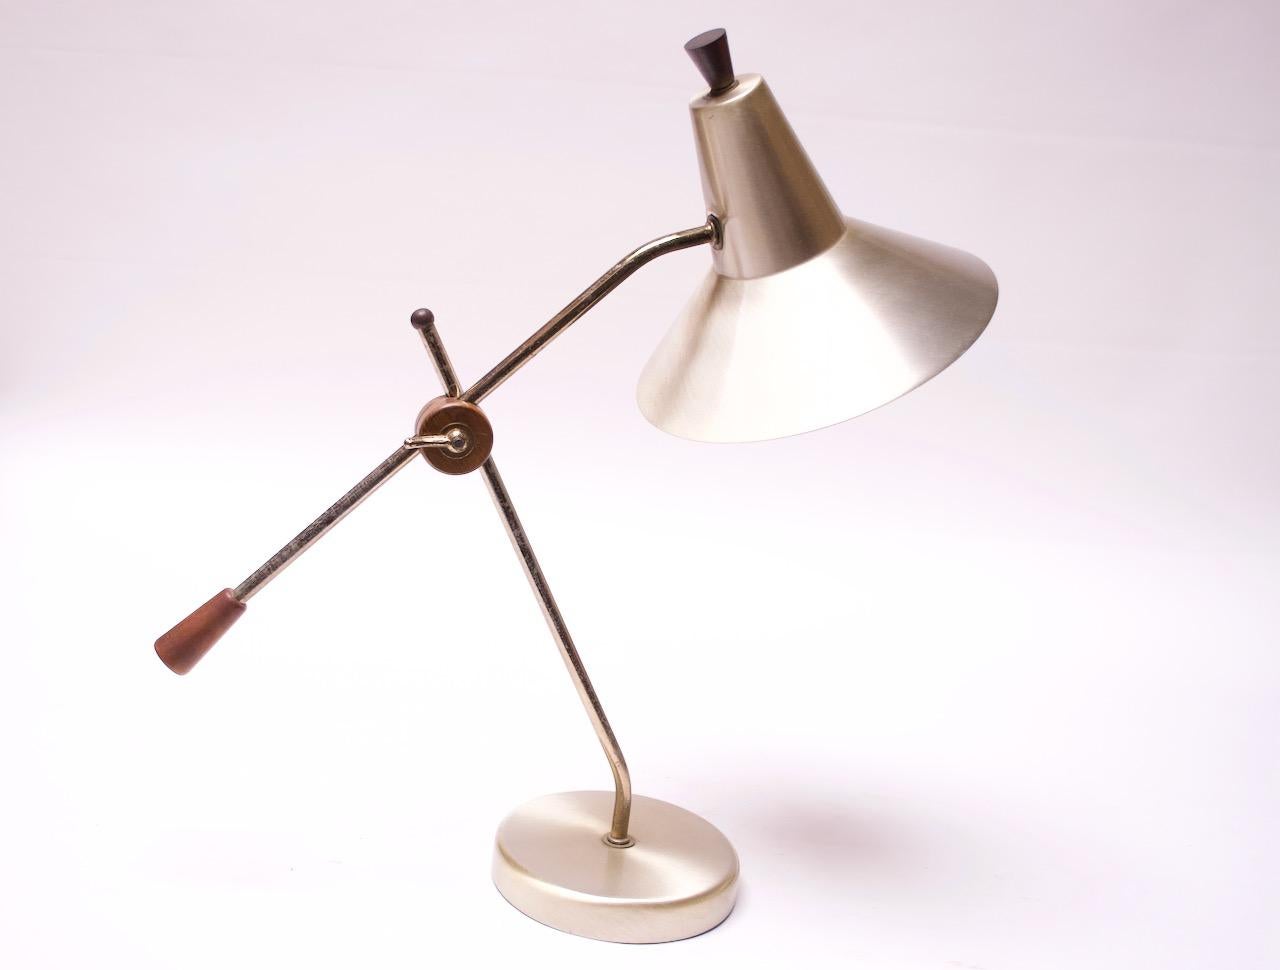 Elegant and highly functional 1950s American Modern adjustable table lamp in walnut and polished brass. The walnut and brass mechanism loosens the arm and allows for arm length and height adjustment (stem is fixed). The shade is additionally fully